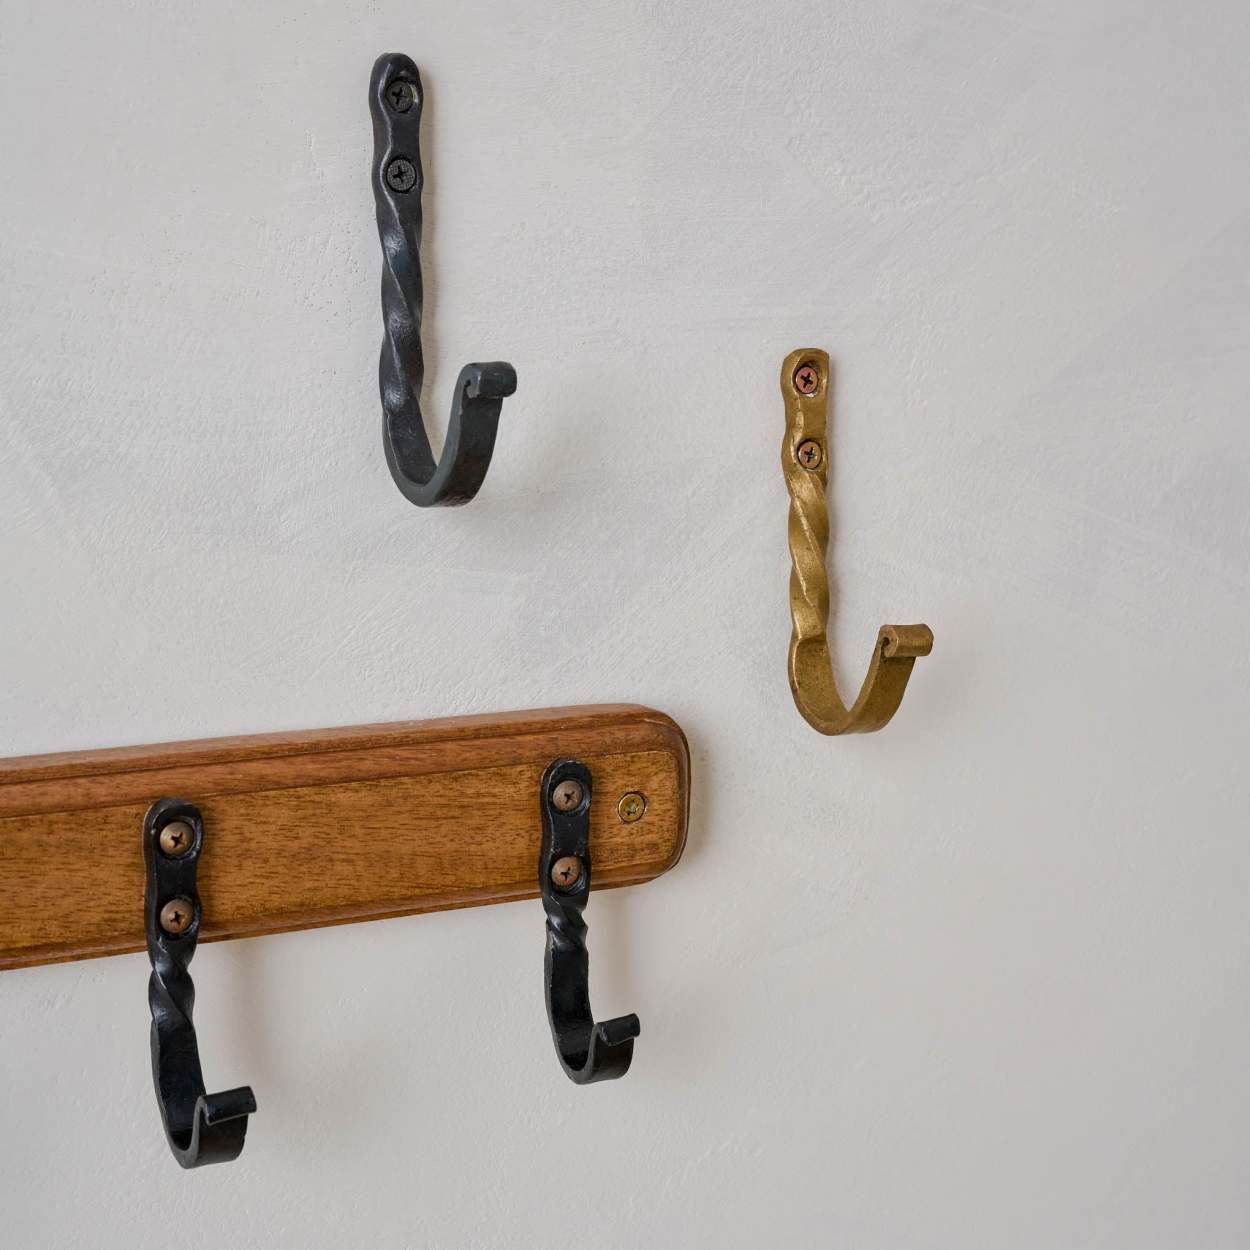 Coat Rack 24 Decorative Coat Hanger, Hand Forged Iron Coat Hooks Add  Character to Any Rustic Interior Decor Ball End Style, Six Hooks 